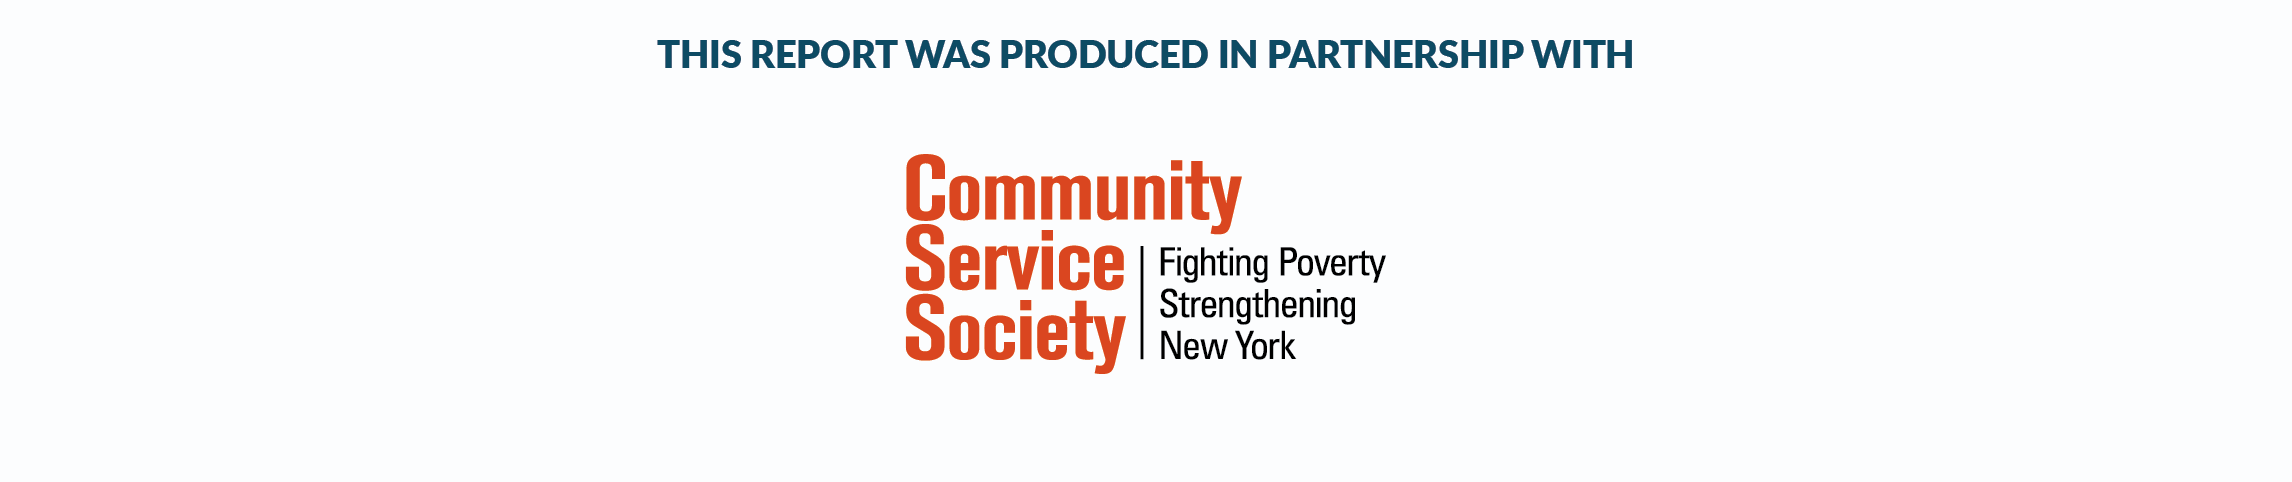 This report was produced in partnership with the Community Service Society of New York